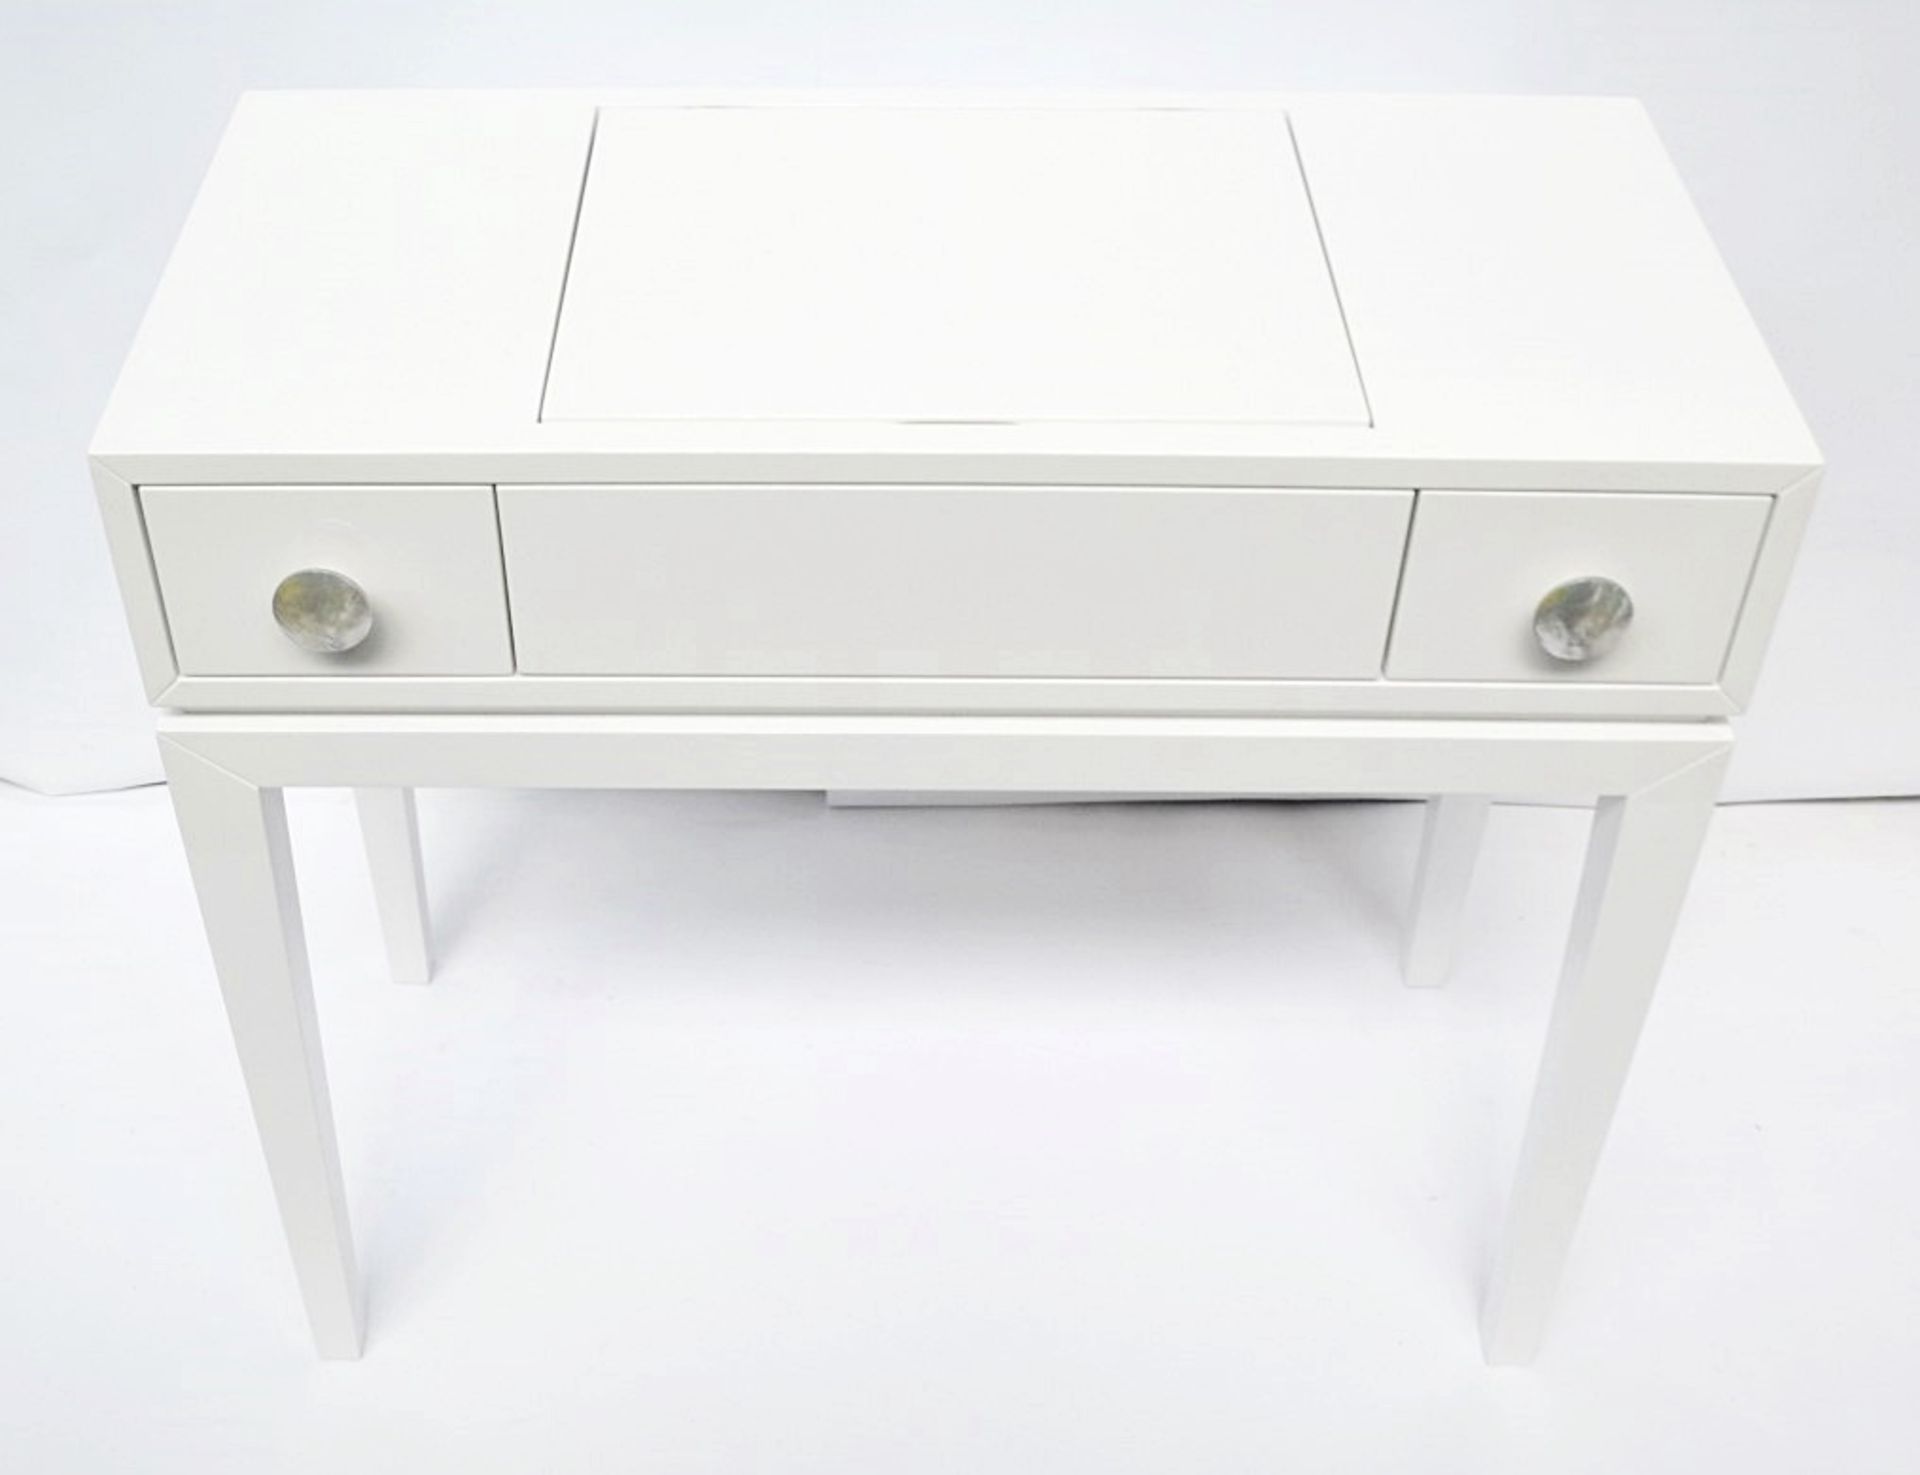 1 x FRATO Chicago Dressing Console - White Lacquered - Dimensions: H75 x W85 x D40cm - Ref: - Image 6 of 6